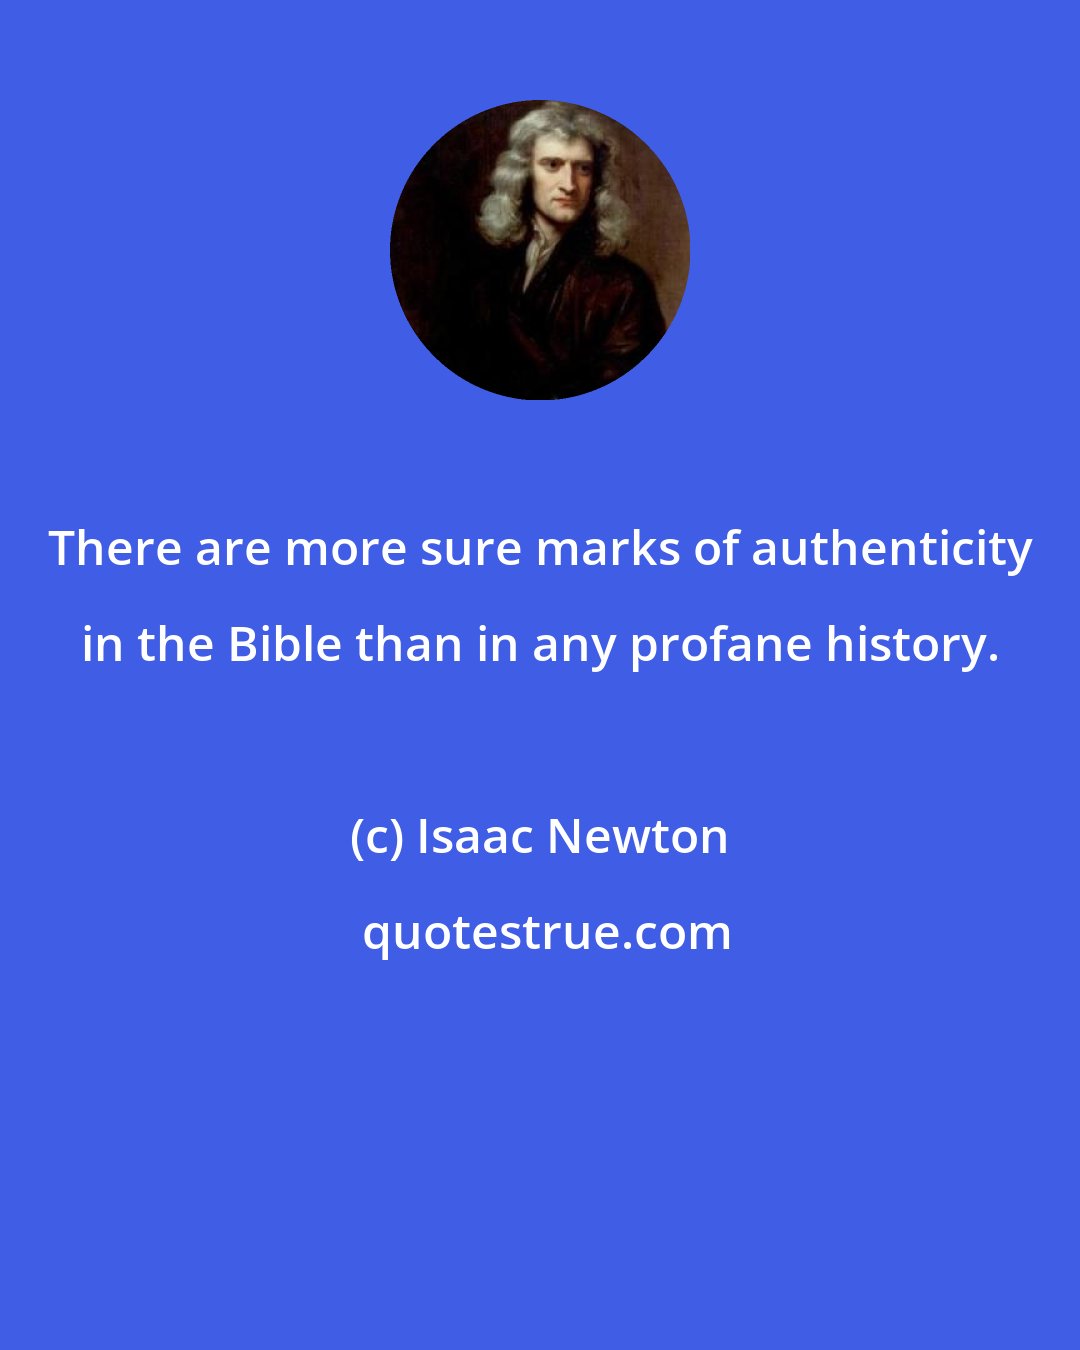 Isaac Newton: There are more sure marks of authenticity in the Bible than in any profane history.